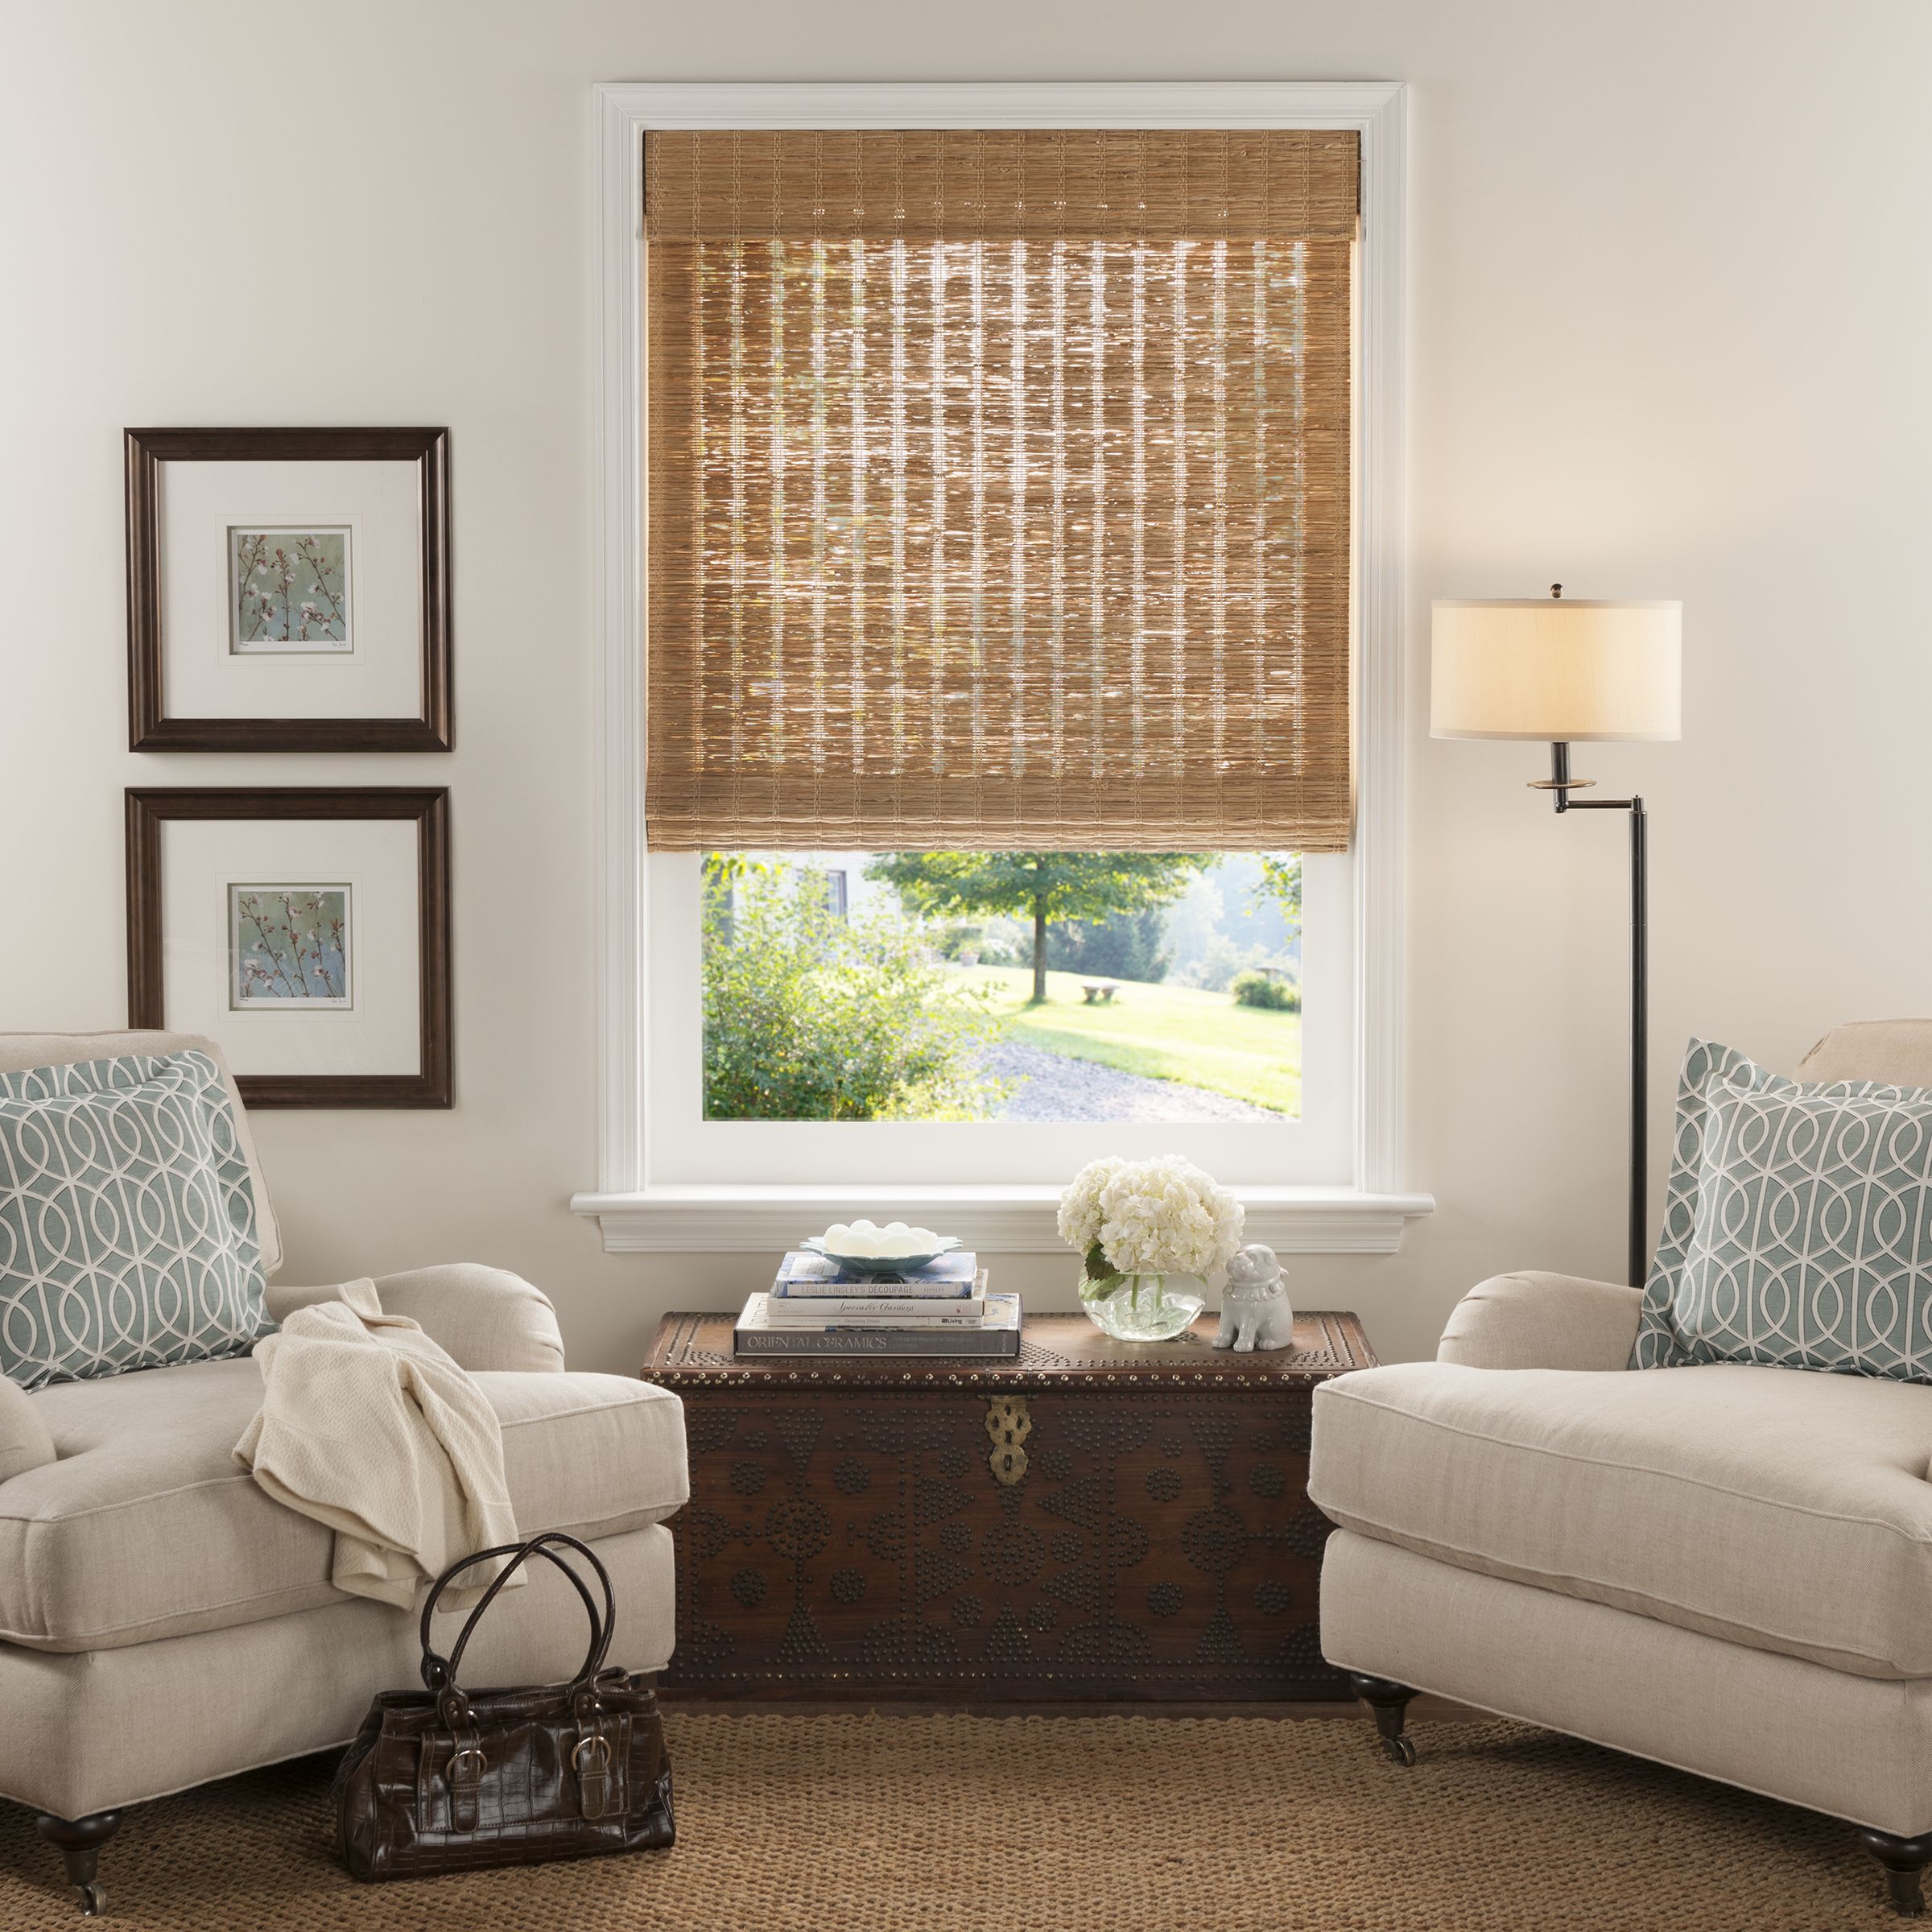 How To Buy Blinds And Shades Window Blinds And Shades Shopping Tips,Lowes Valspar Chalk Paint Colors